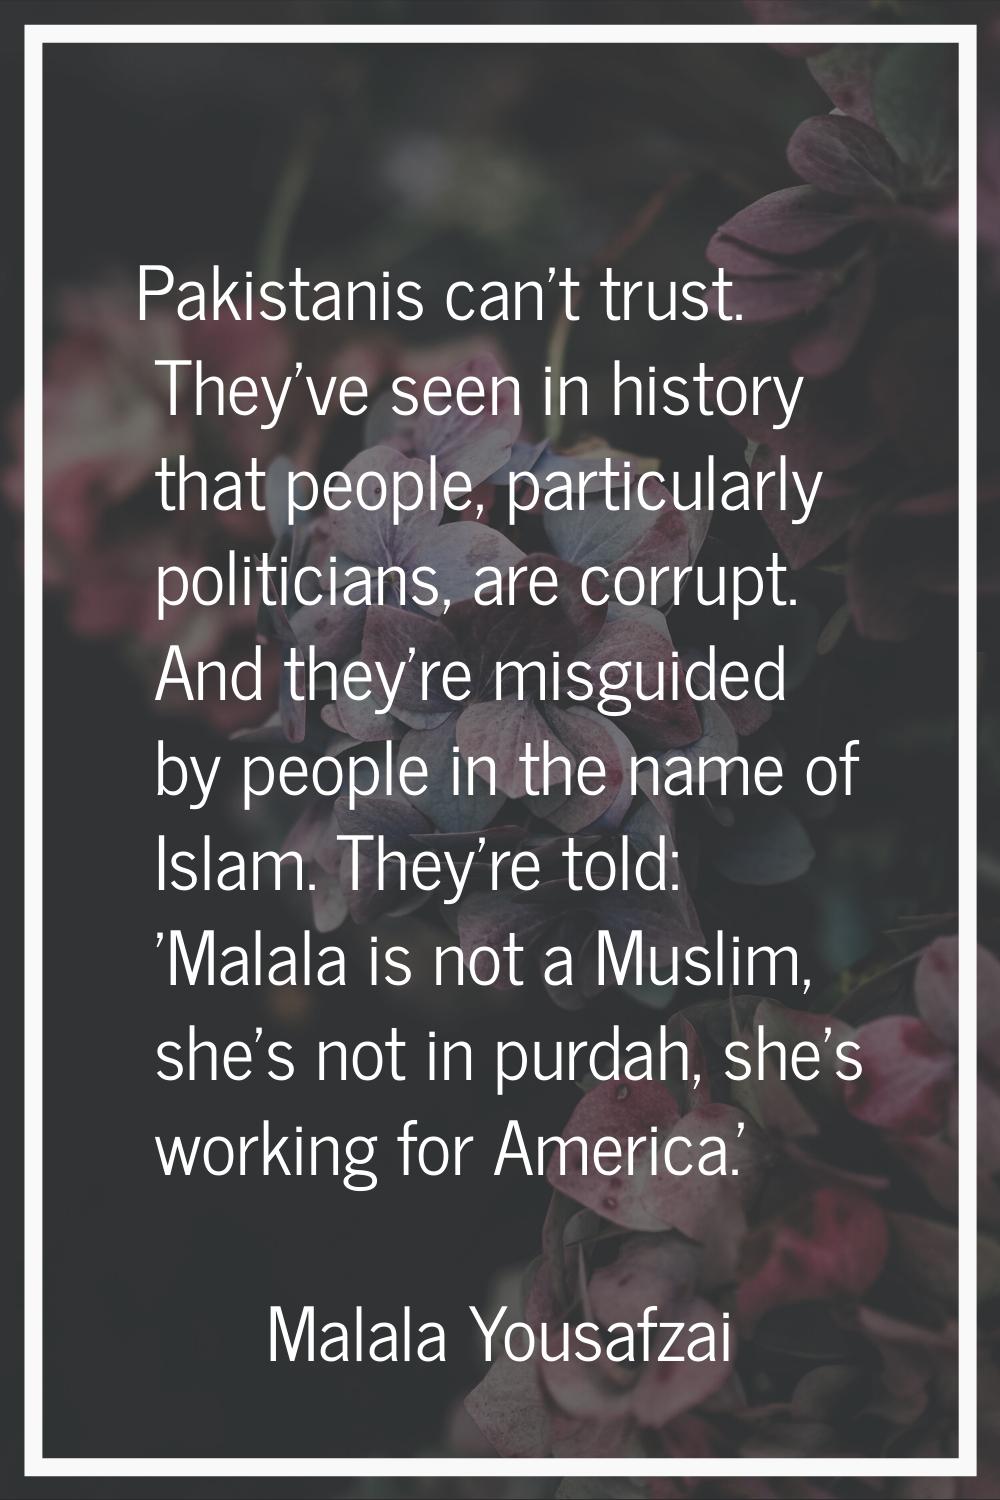 Pakistanis can't trust. They've seen in history that people, particularly politicians, are corrupt.